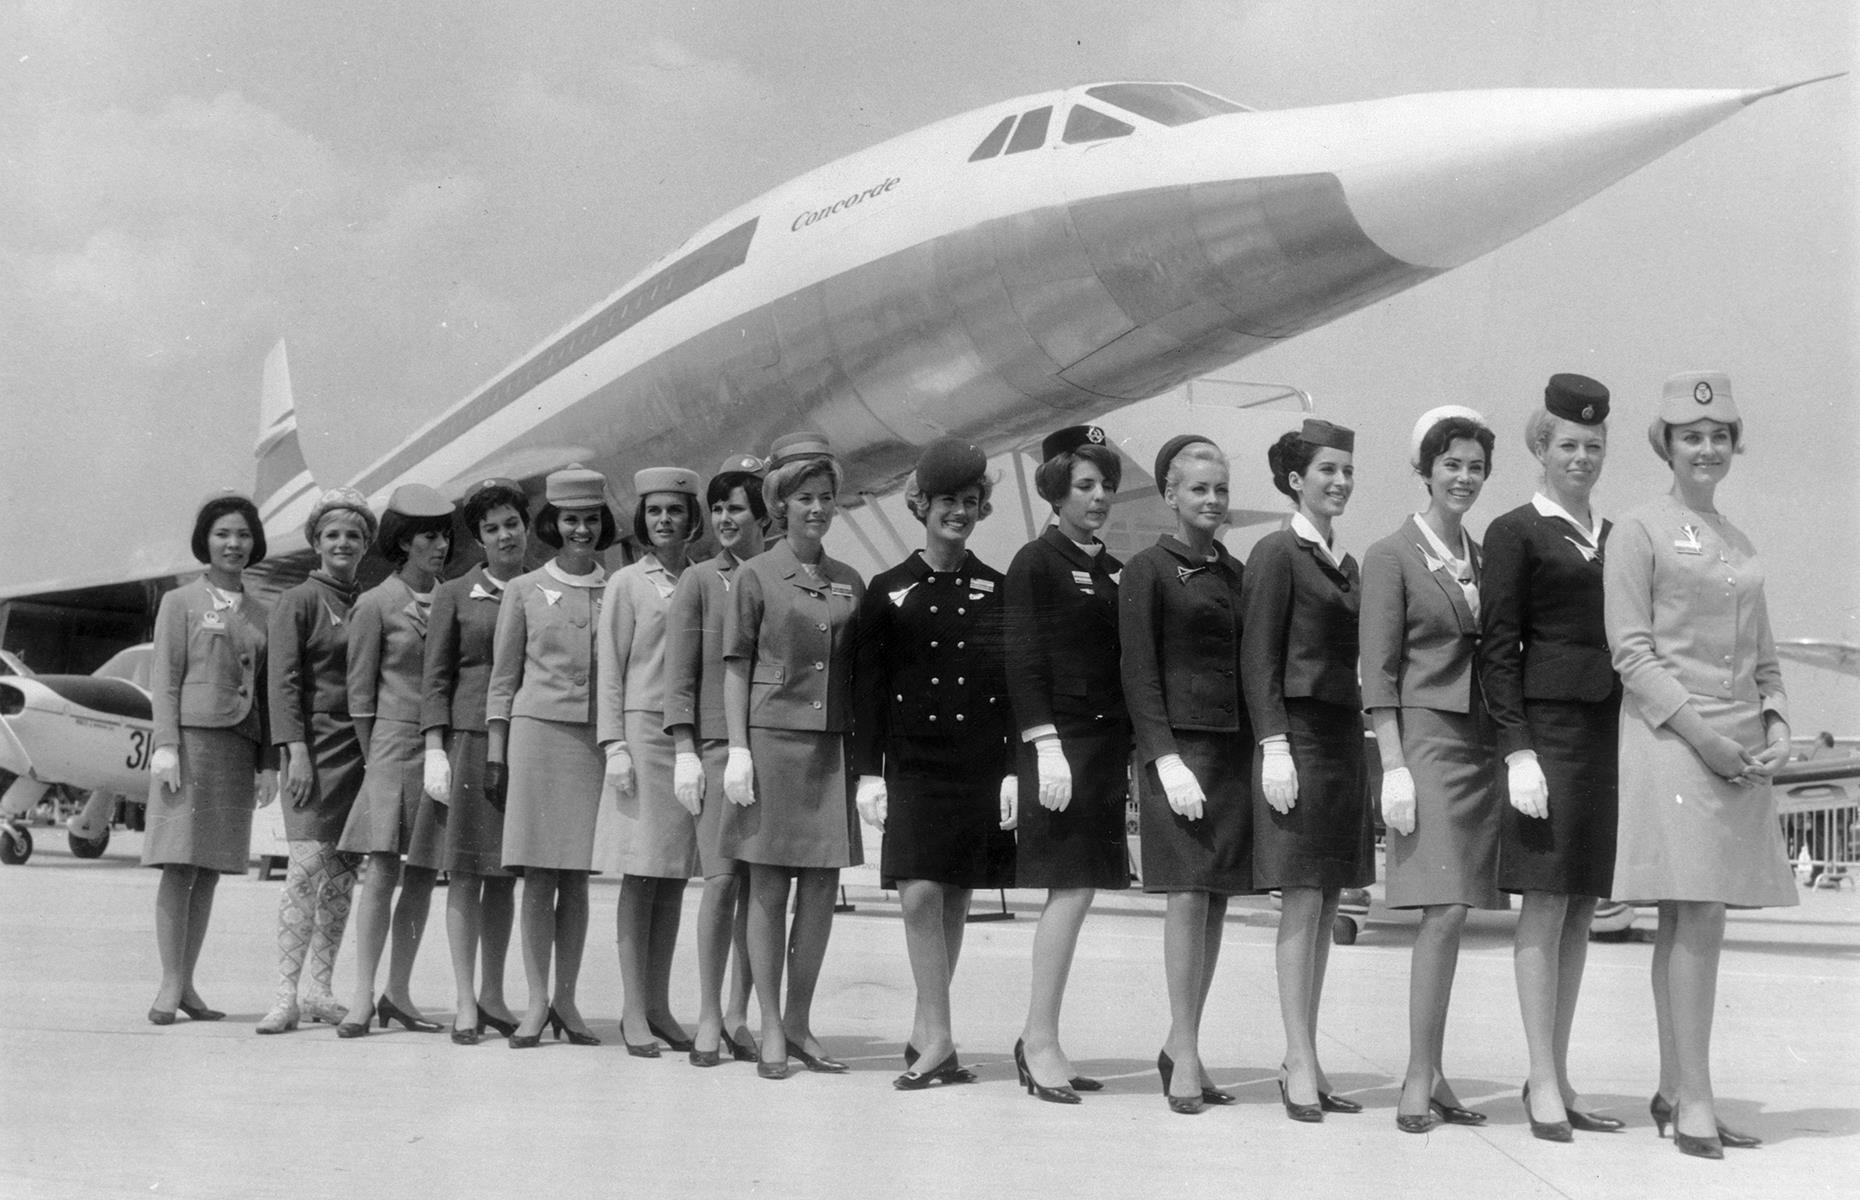 In the 1960s, development on what would become one of the most iconic aircraft in commercial aviation began. The project had been floated since the 1950s, and the aim was to create a supersonic airliner that would revolutionize commercial aviation. Concorde made its maiden test flight in 1969 and here flight attendants from various airlines stand before a full-scale model of the aircraft.